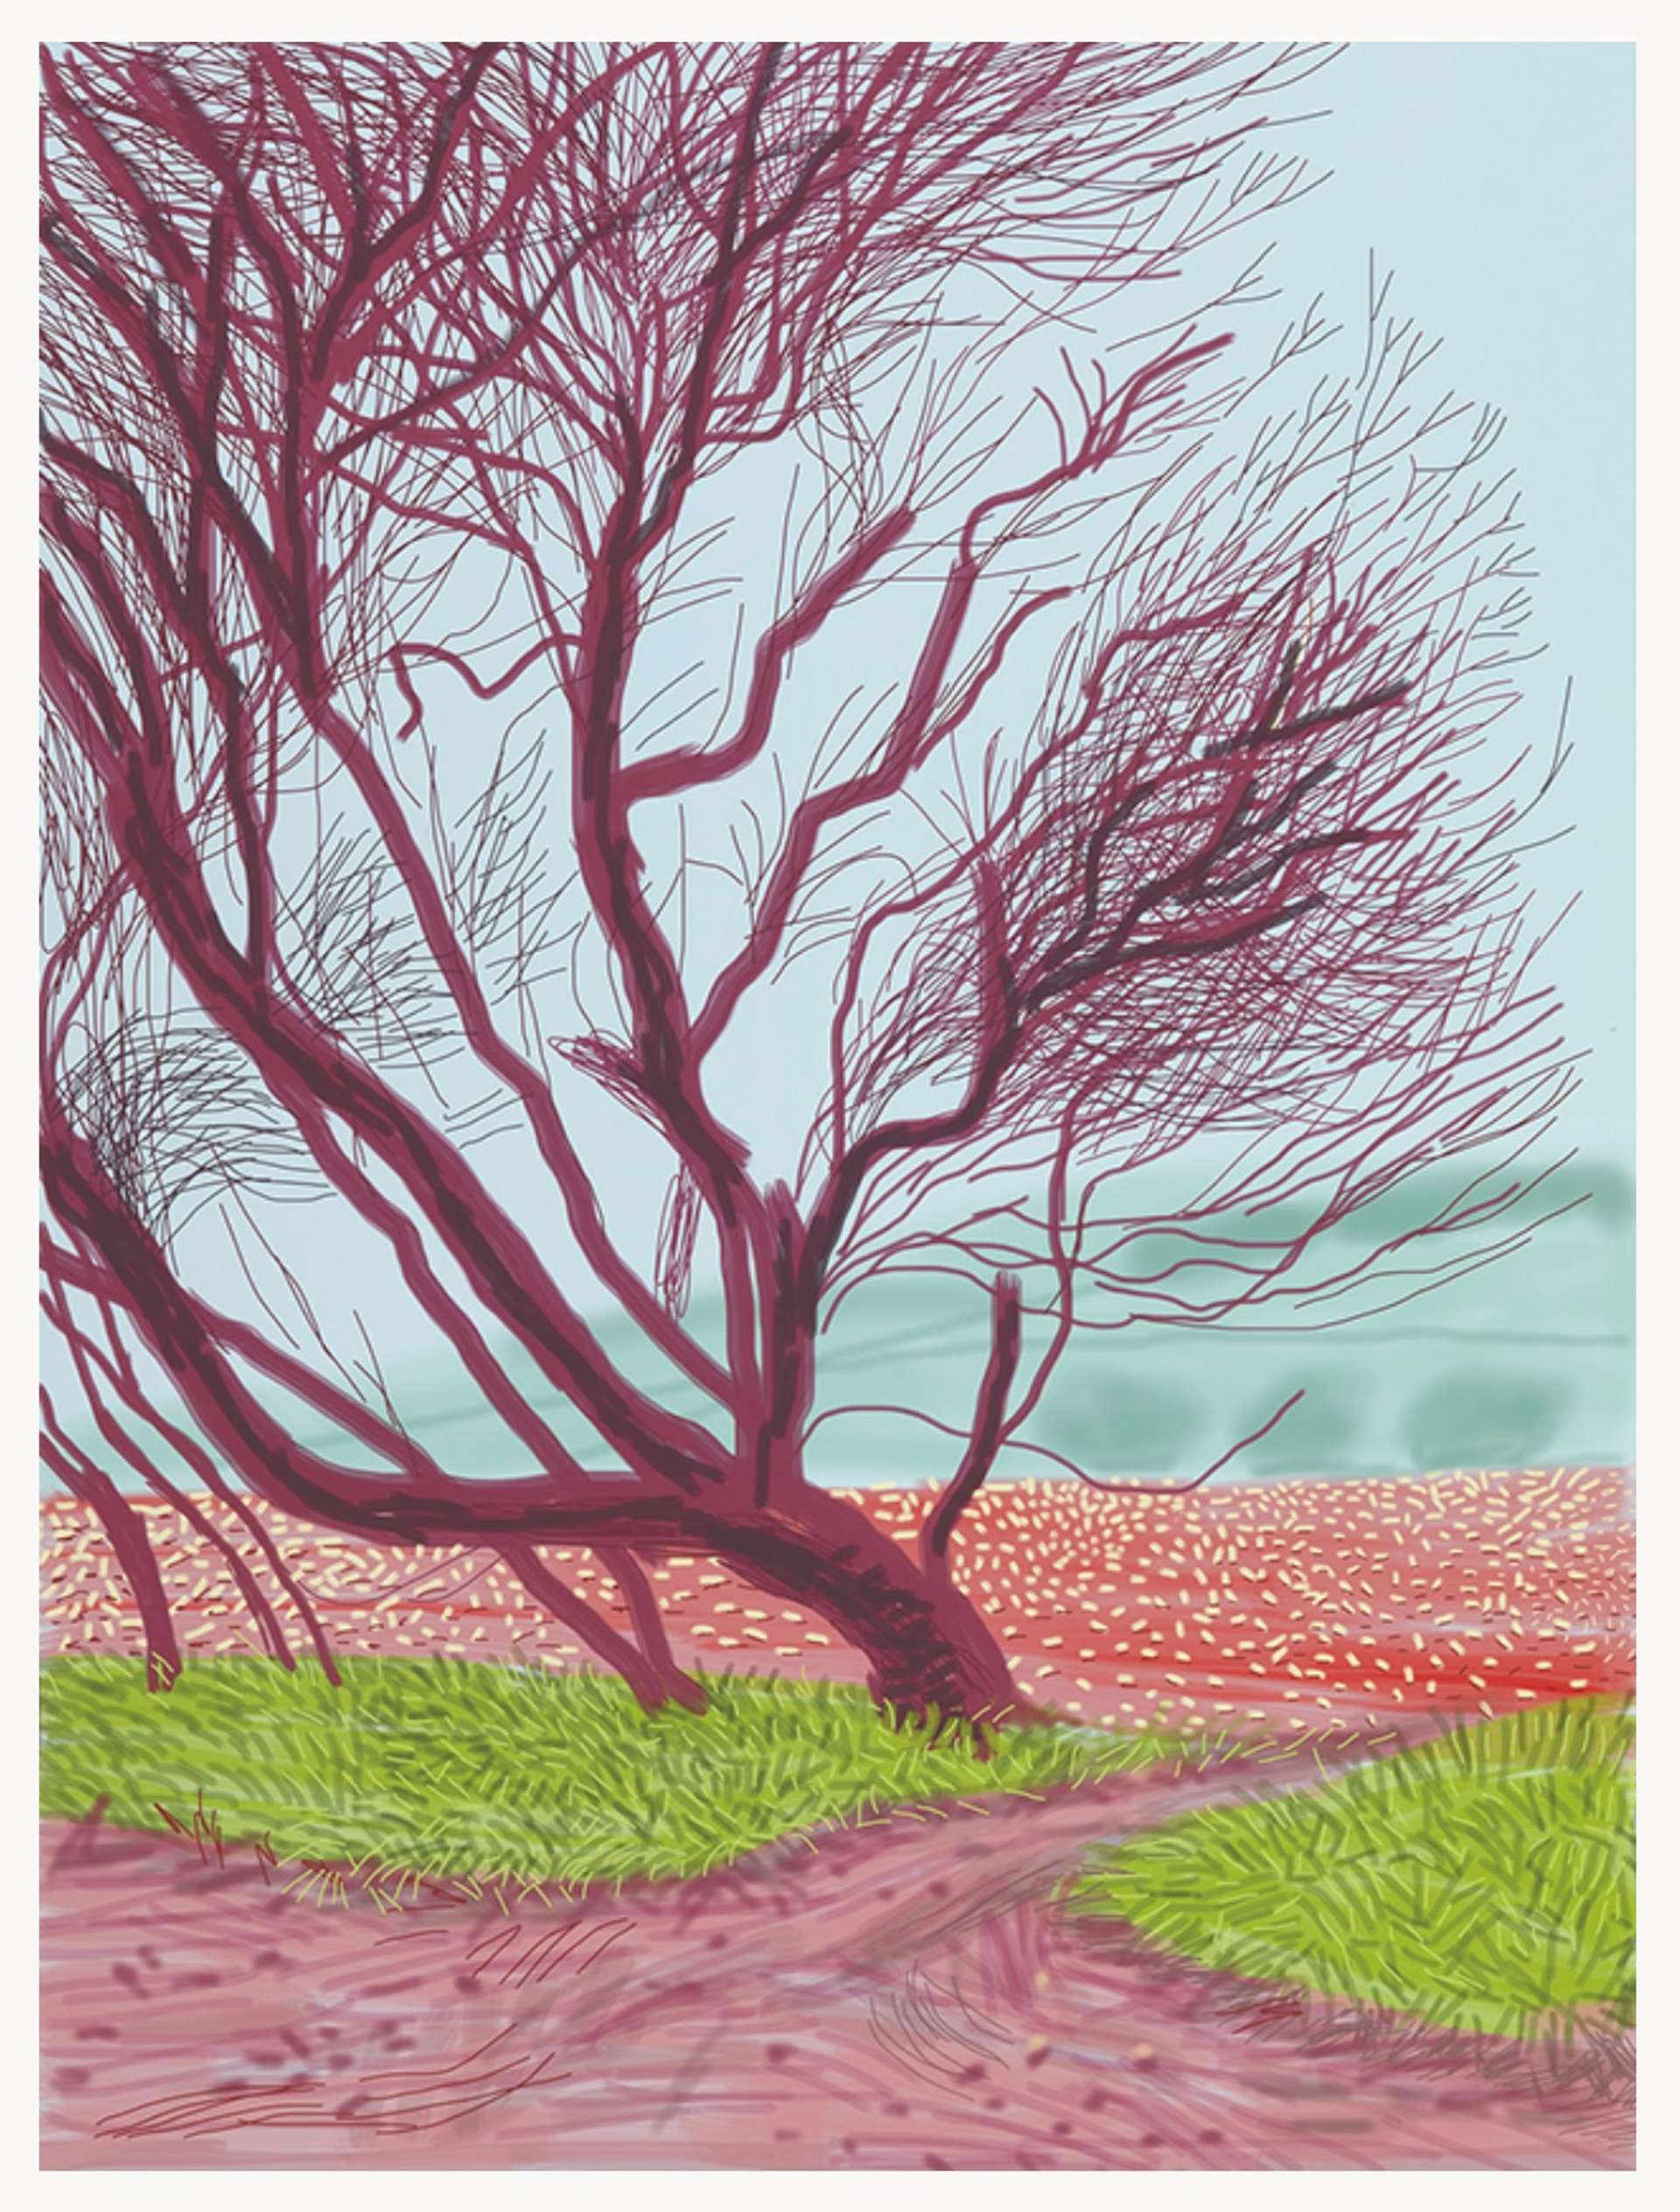 The Arrival Of Spring In Woldgate East Yorkshire 18th March 2011 - Signed Print by David Hockney 2011 - MyArtBroker